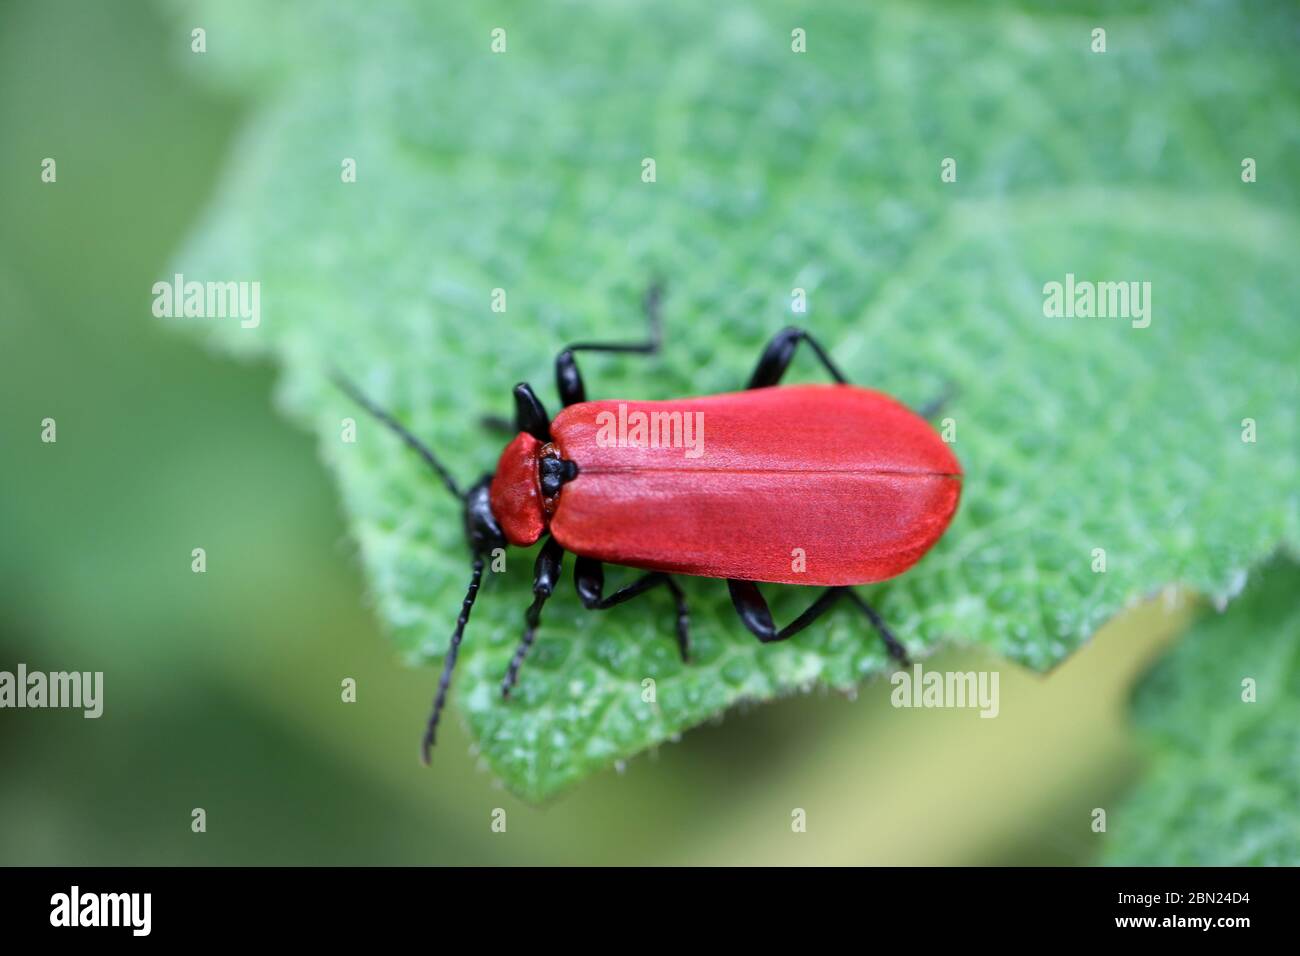 Red Cardinal Beetle on green leaf in the garden,red bettle on green leaf with pattrens,wildlife insect,red insect on green leaf macro,macro photograph Stock Photo